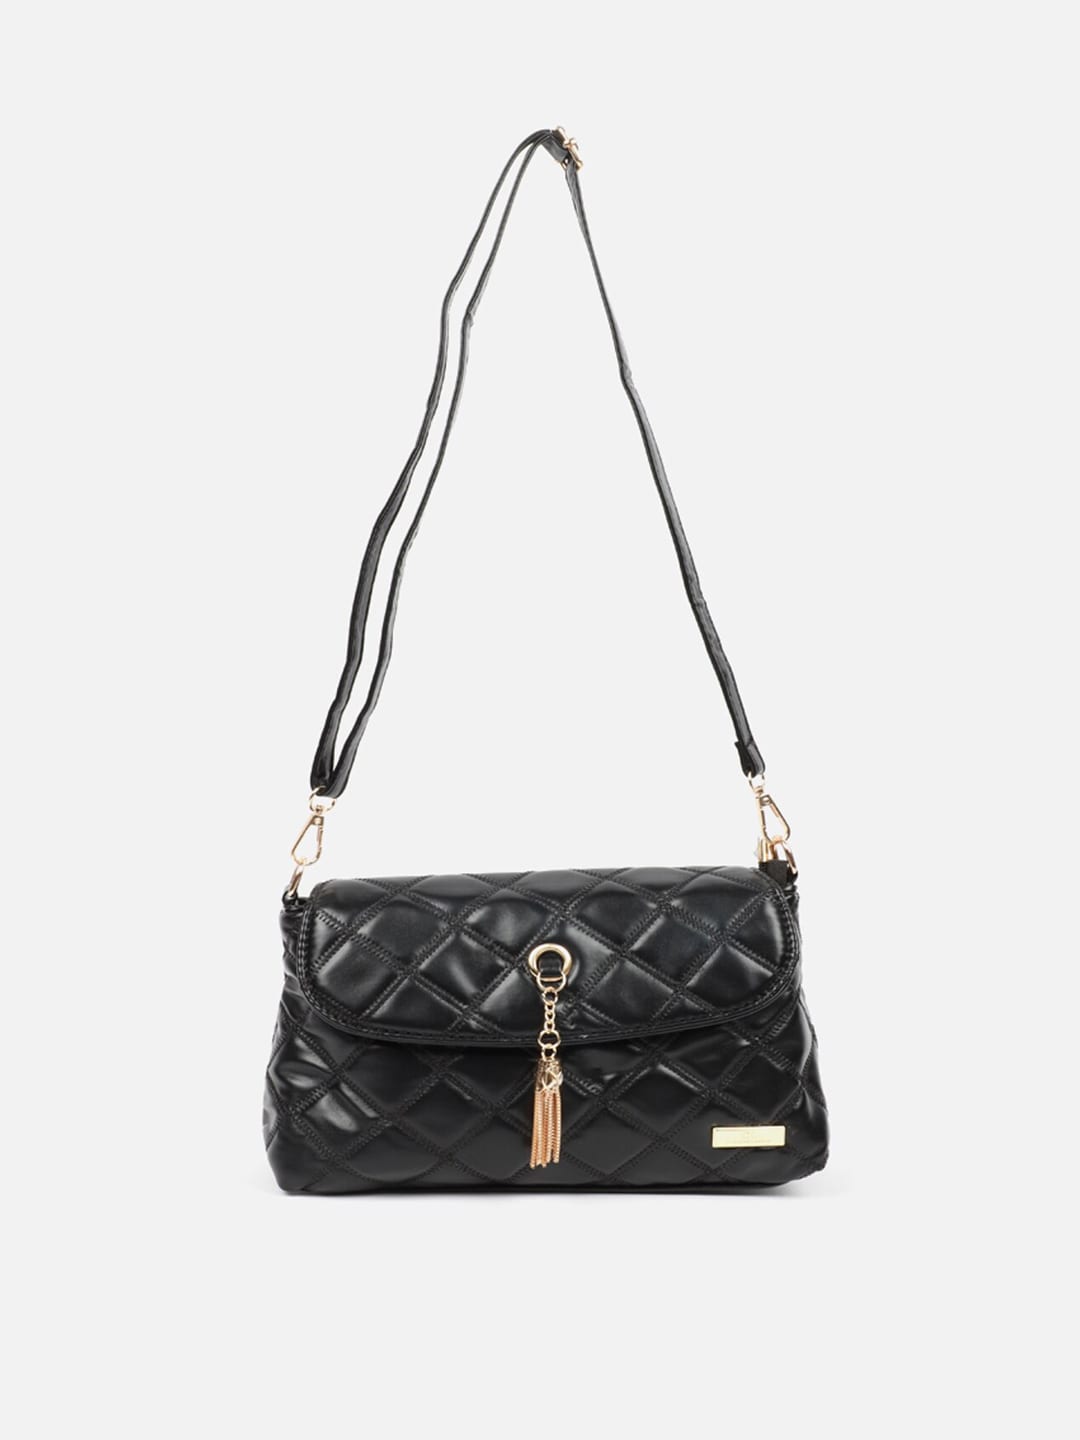 Carlton London Black Structured Sling Bag with Quilted Price in India